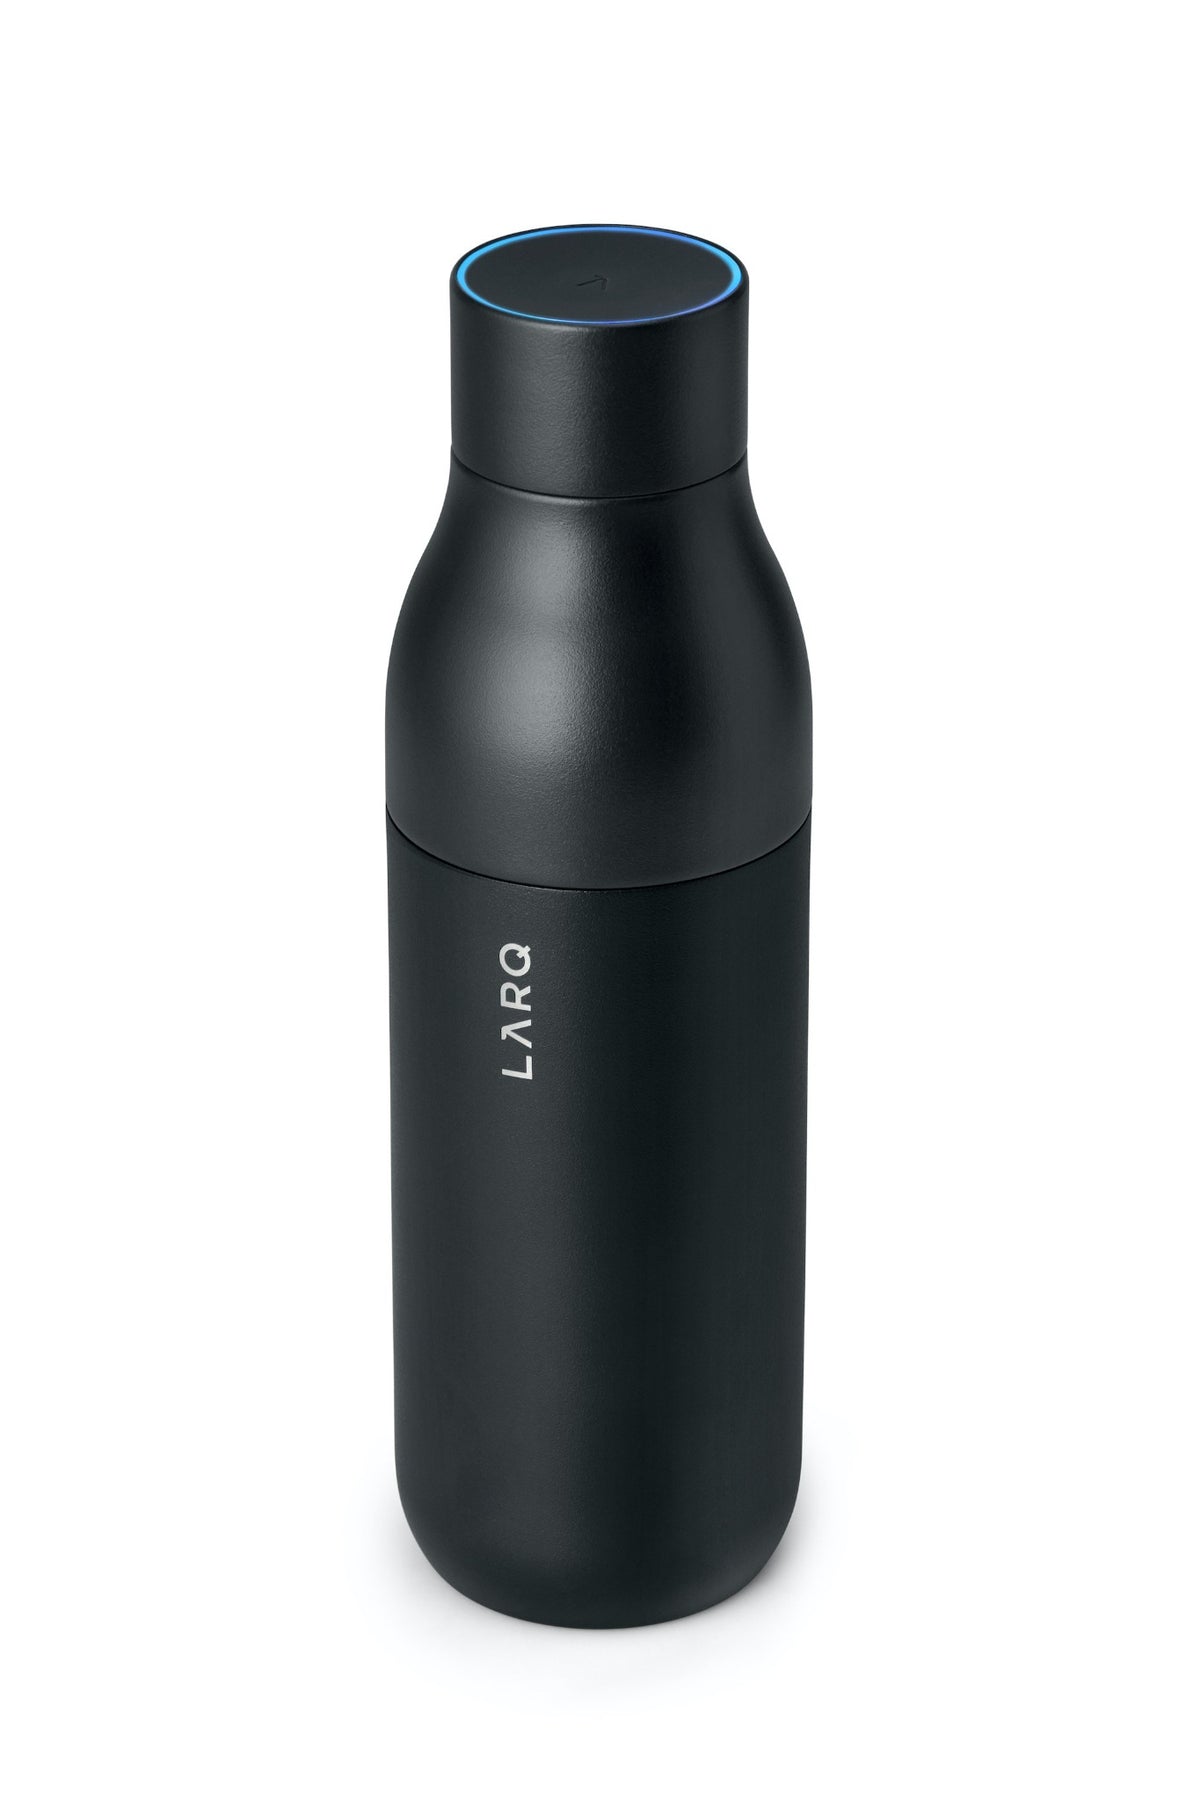 LARQ – The World's First Self-Cleaning Water Bottle 